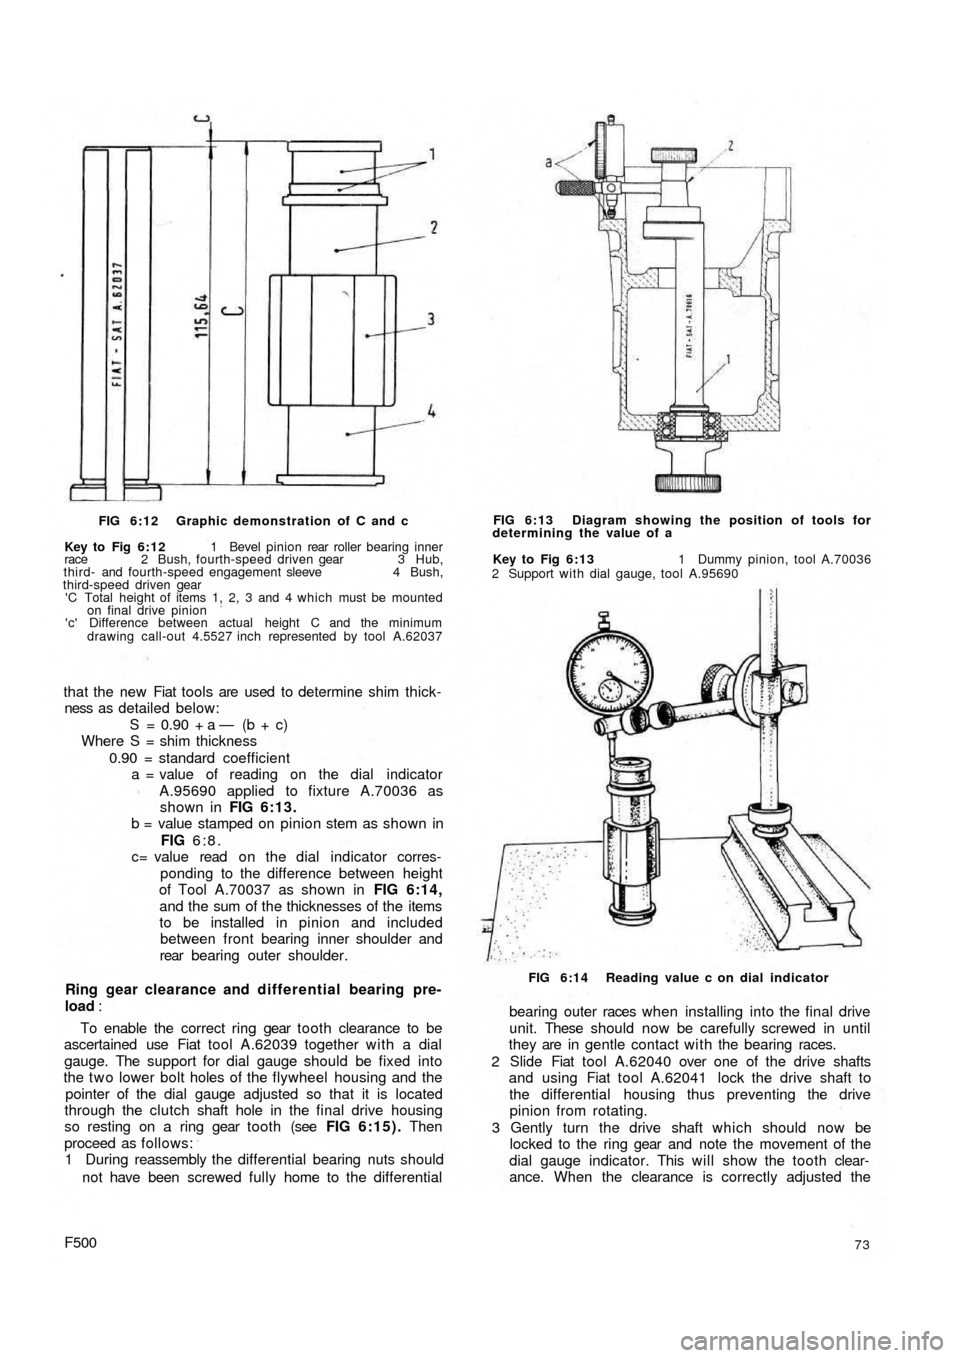 FIAT 500 1971 1.G Repair Manual FIG 6:12 Graphic demonstration  of C and c
Key to Fig 6:12 1 Bevel pinion rear roller bearing inner
race 2 Bush, fourth-speed driven gear 3 Hub,
third- and fourth-speed engagement sleeve 4 Bush,
third